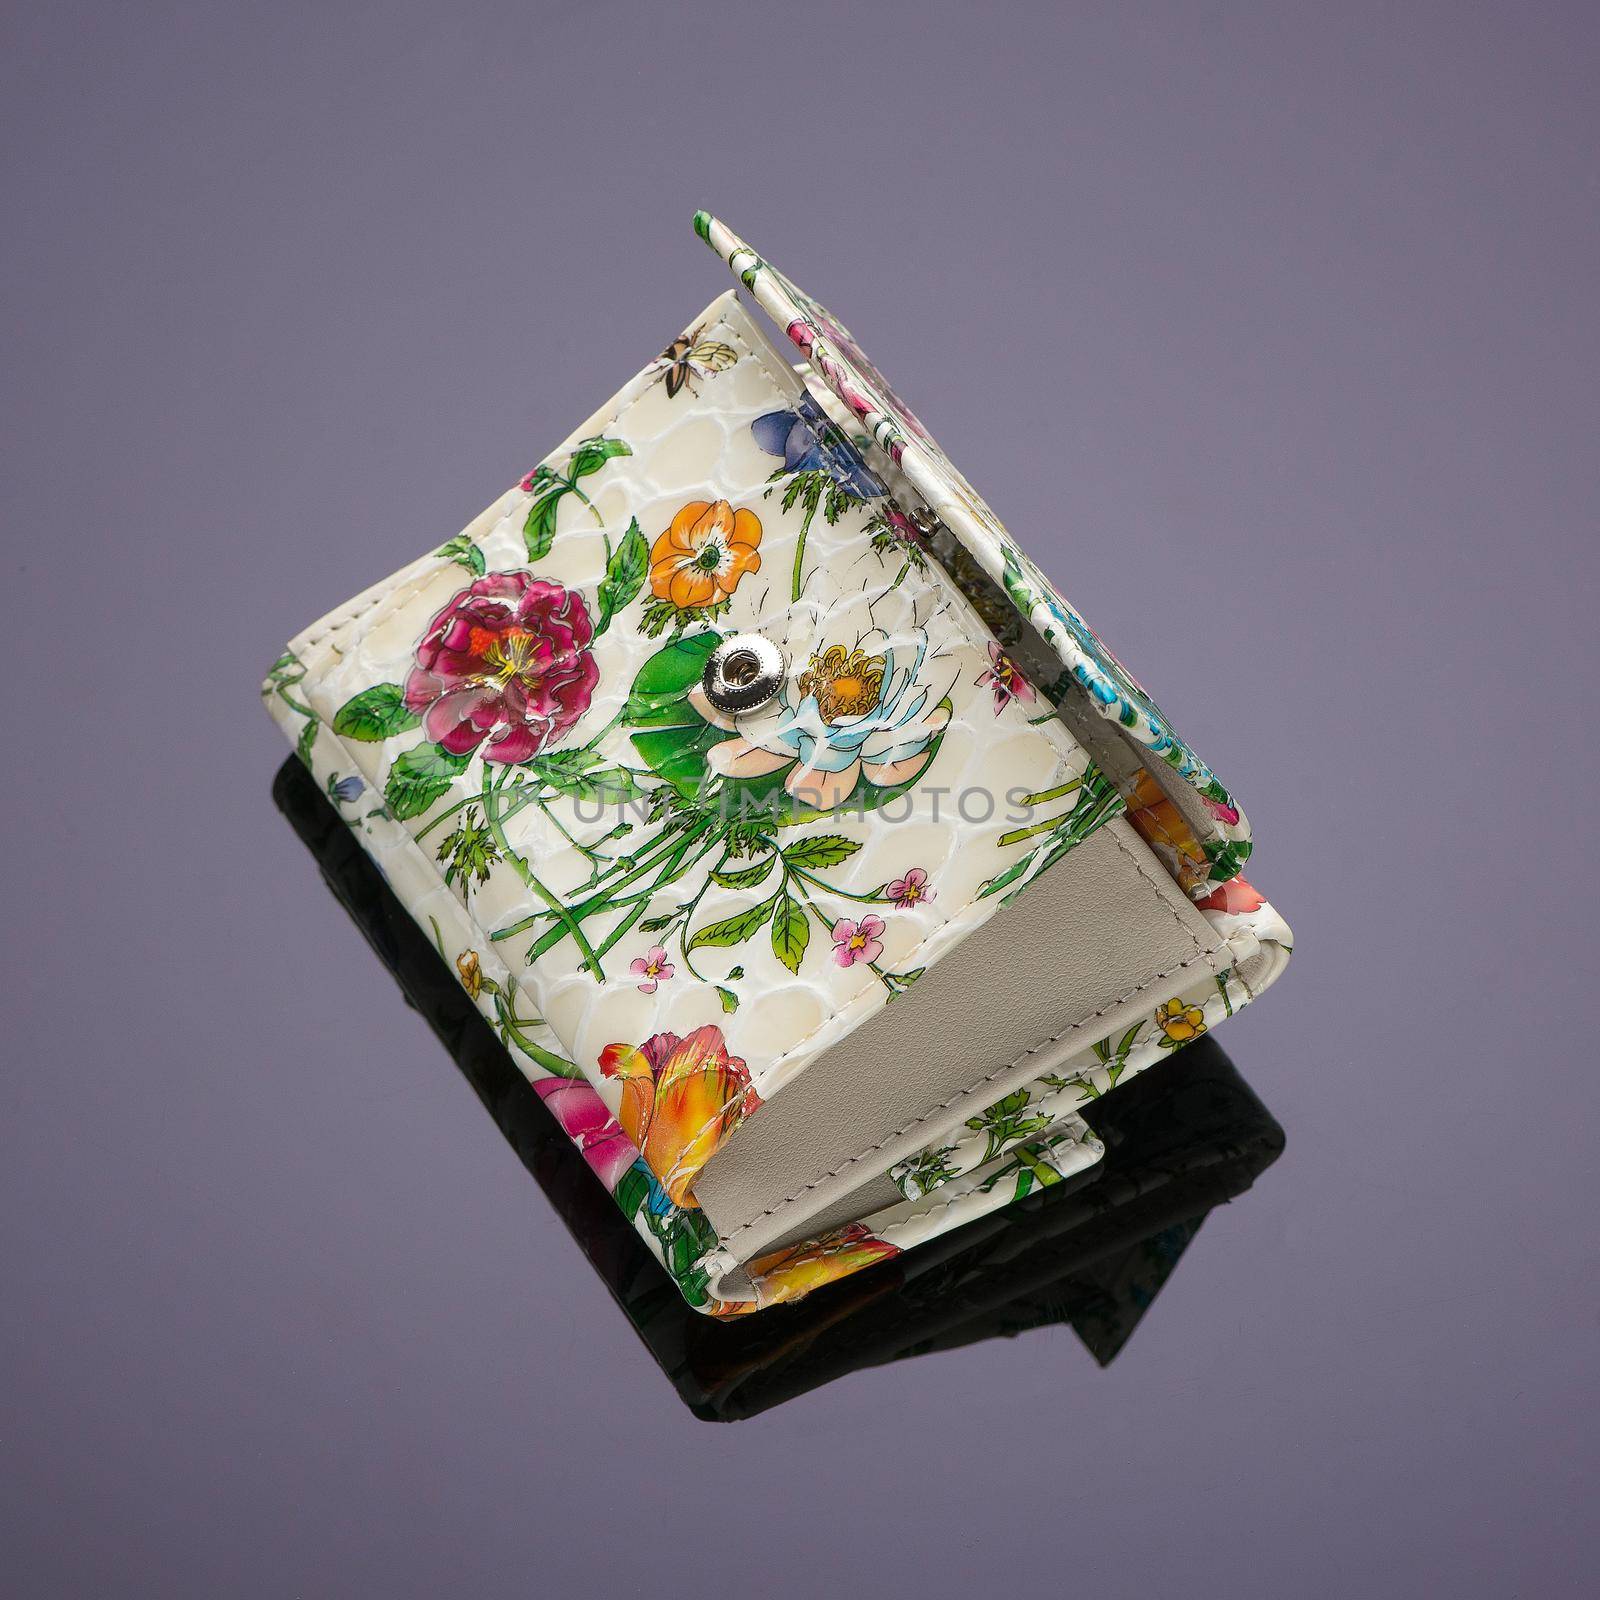 A close-up shot of a floral money purse placed on a reflecting surface.